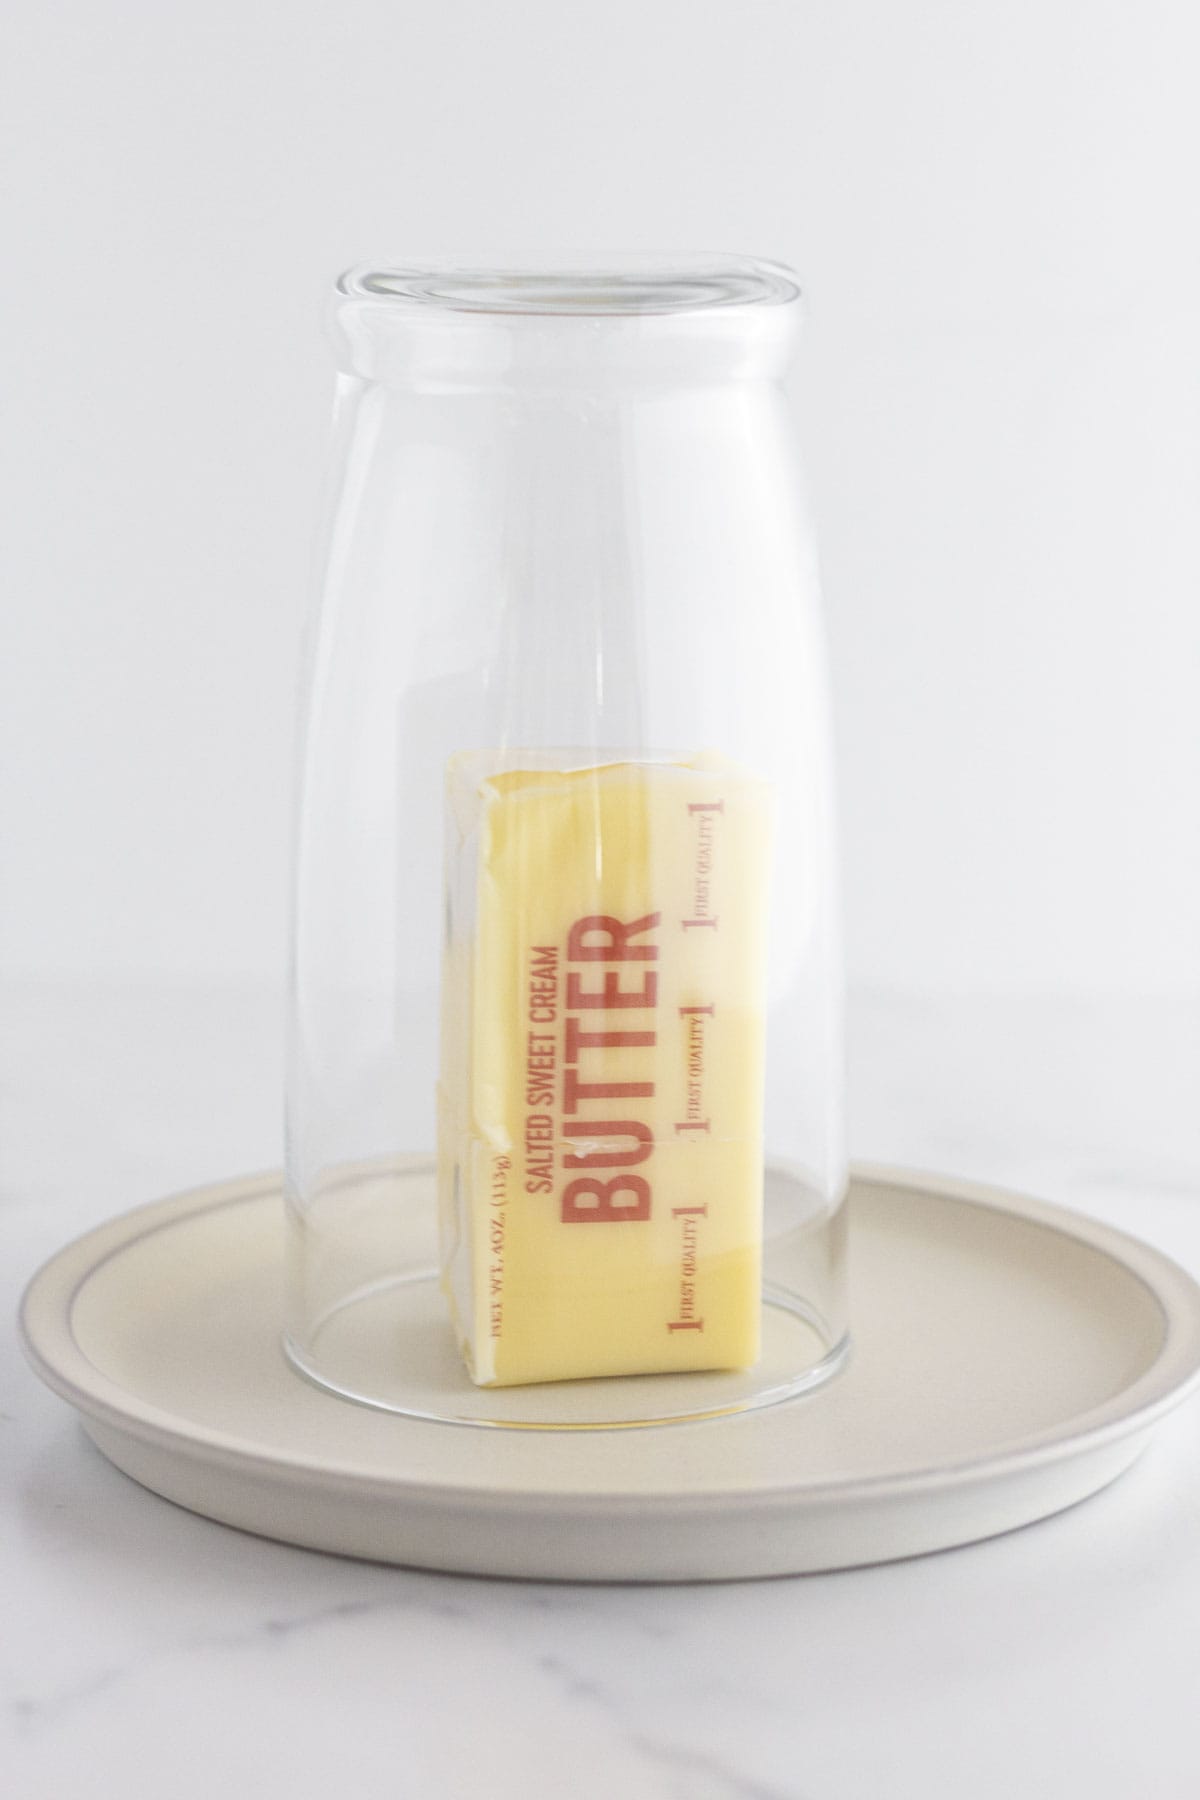 A warm cup over a stick of butter to bring it to room temperature.